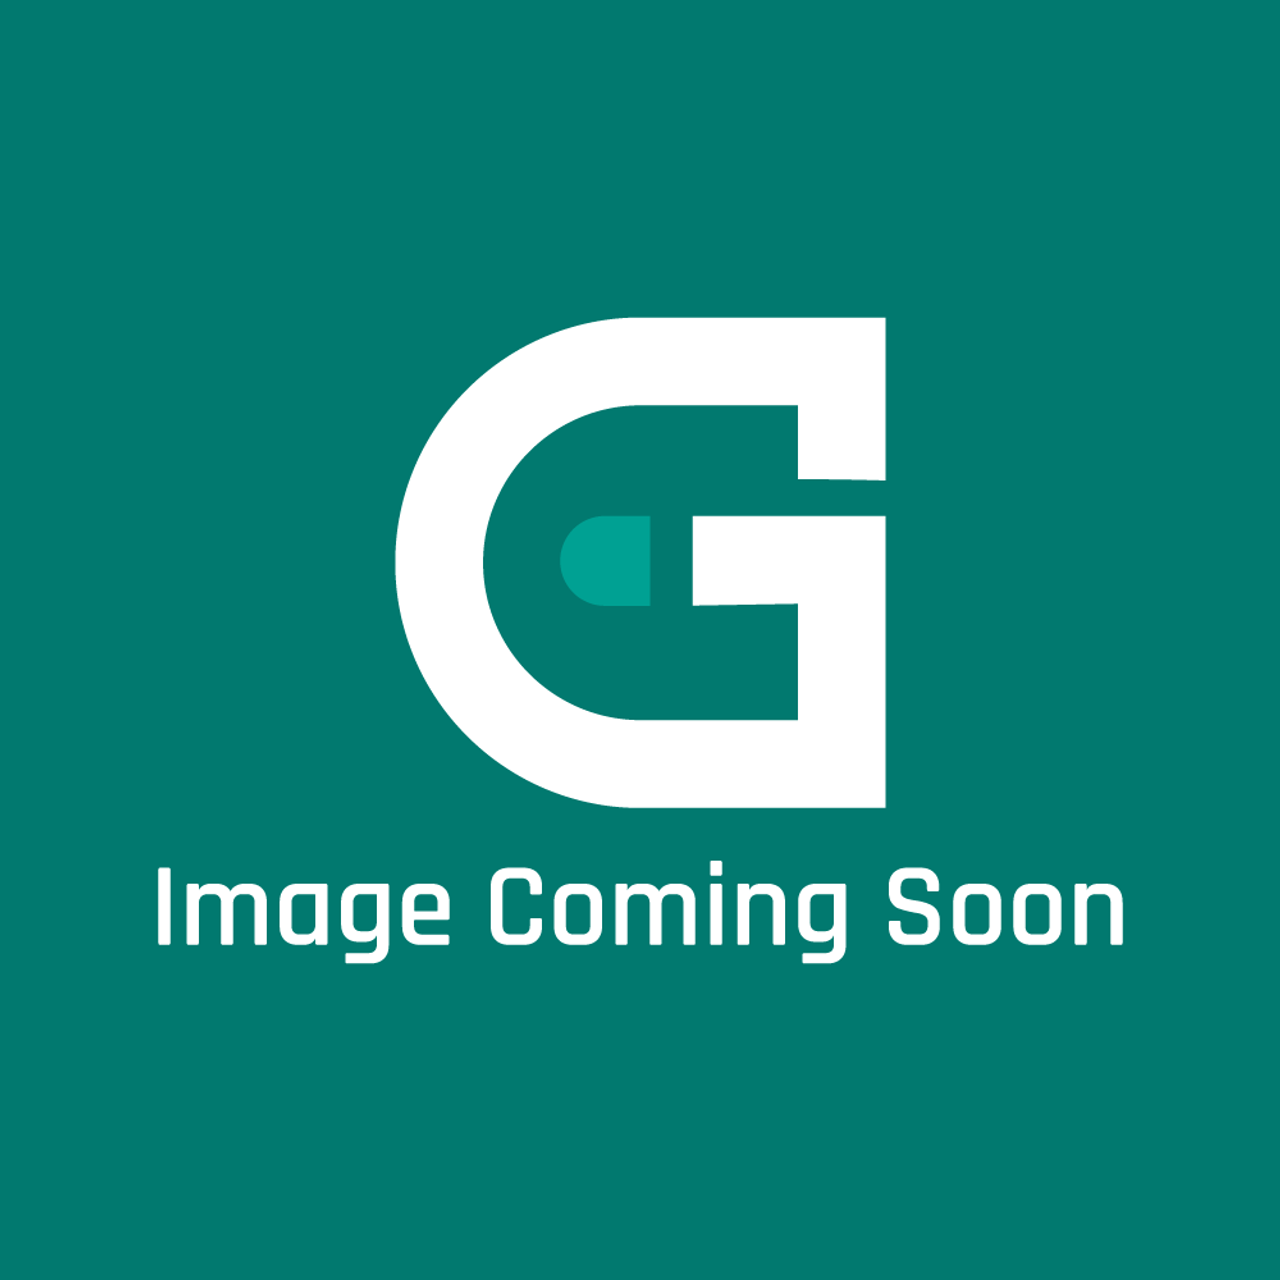 Fisher & Paykel 214427 - Drip Pan Bgb132 - Discontinued 9/19 MT - Image Coming Soon!